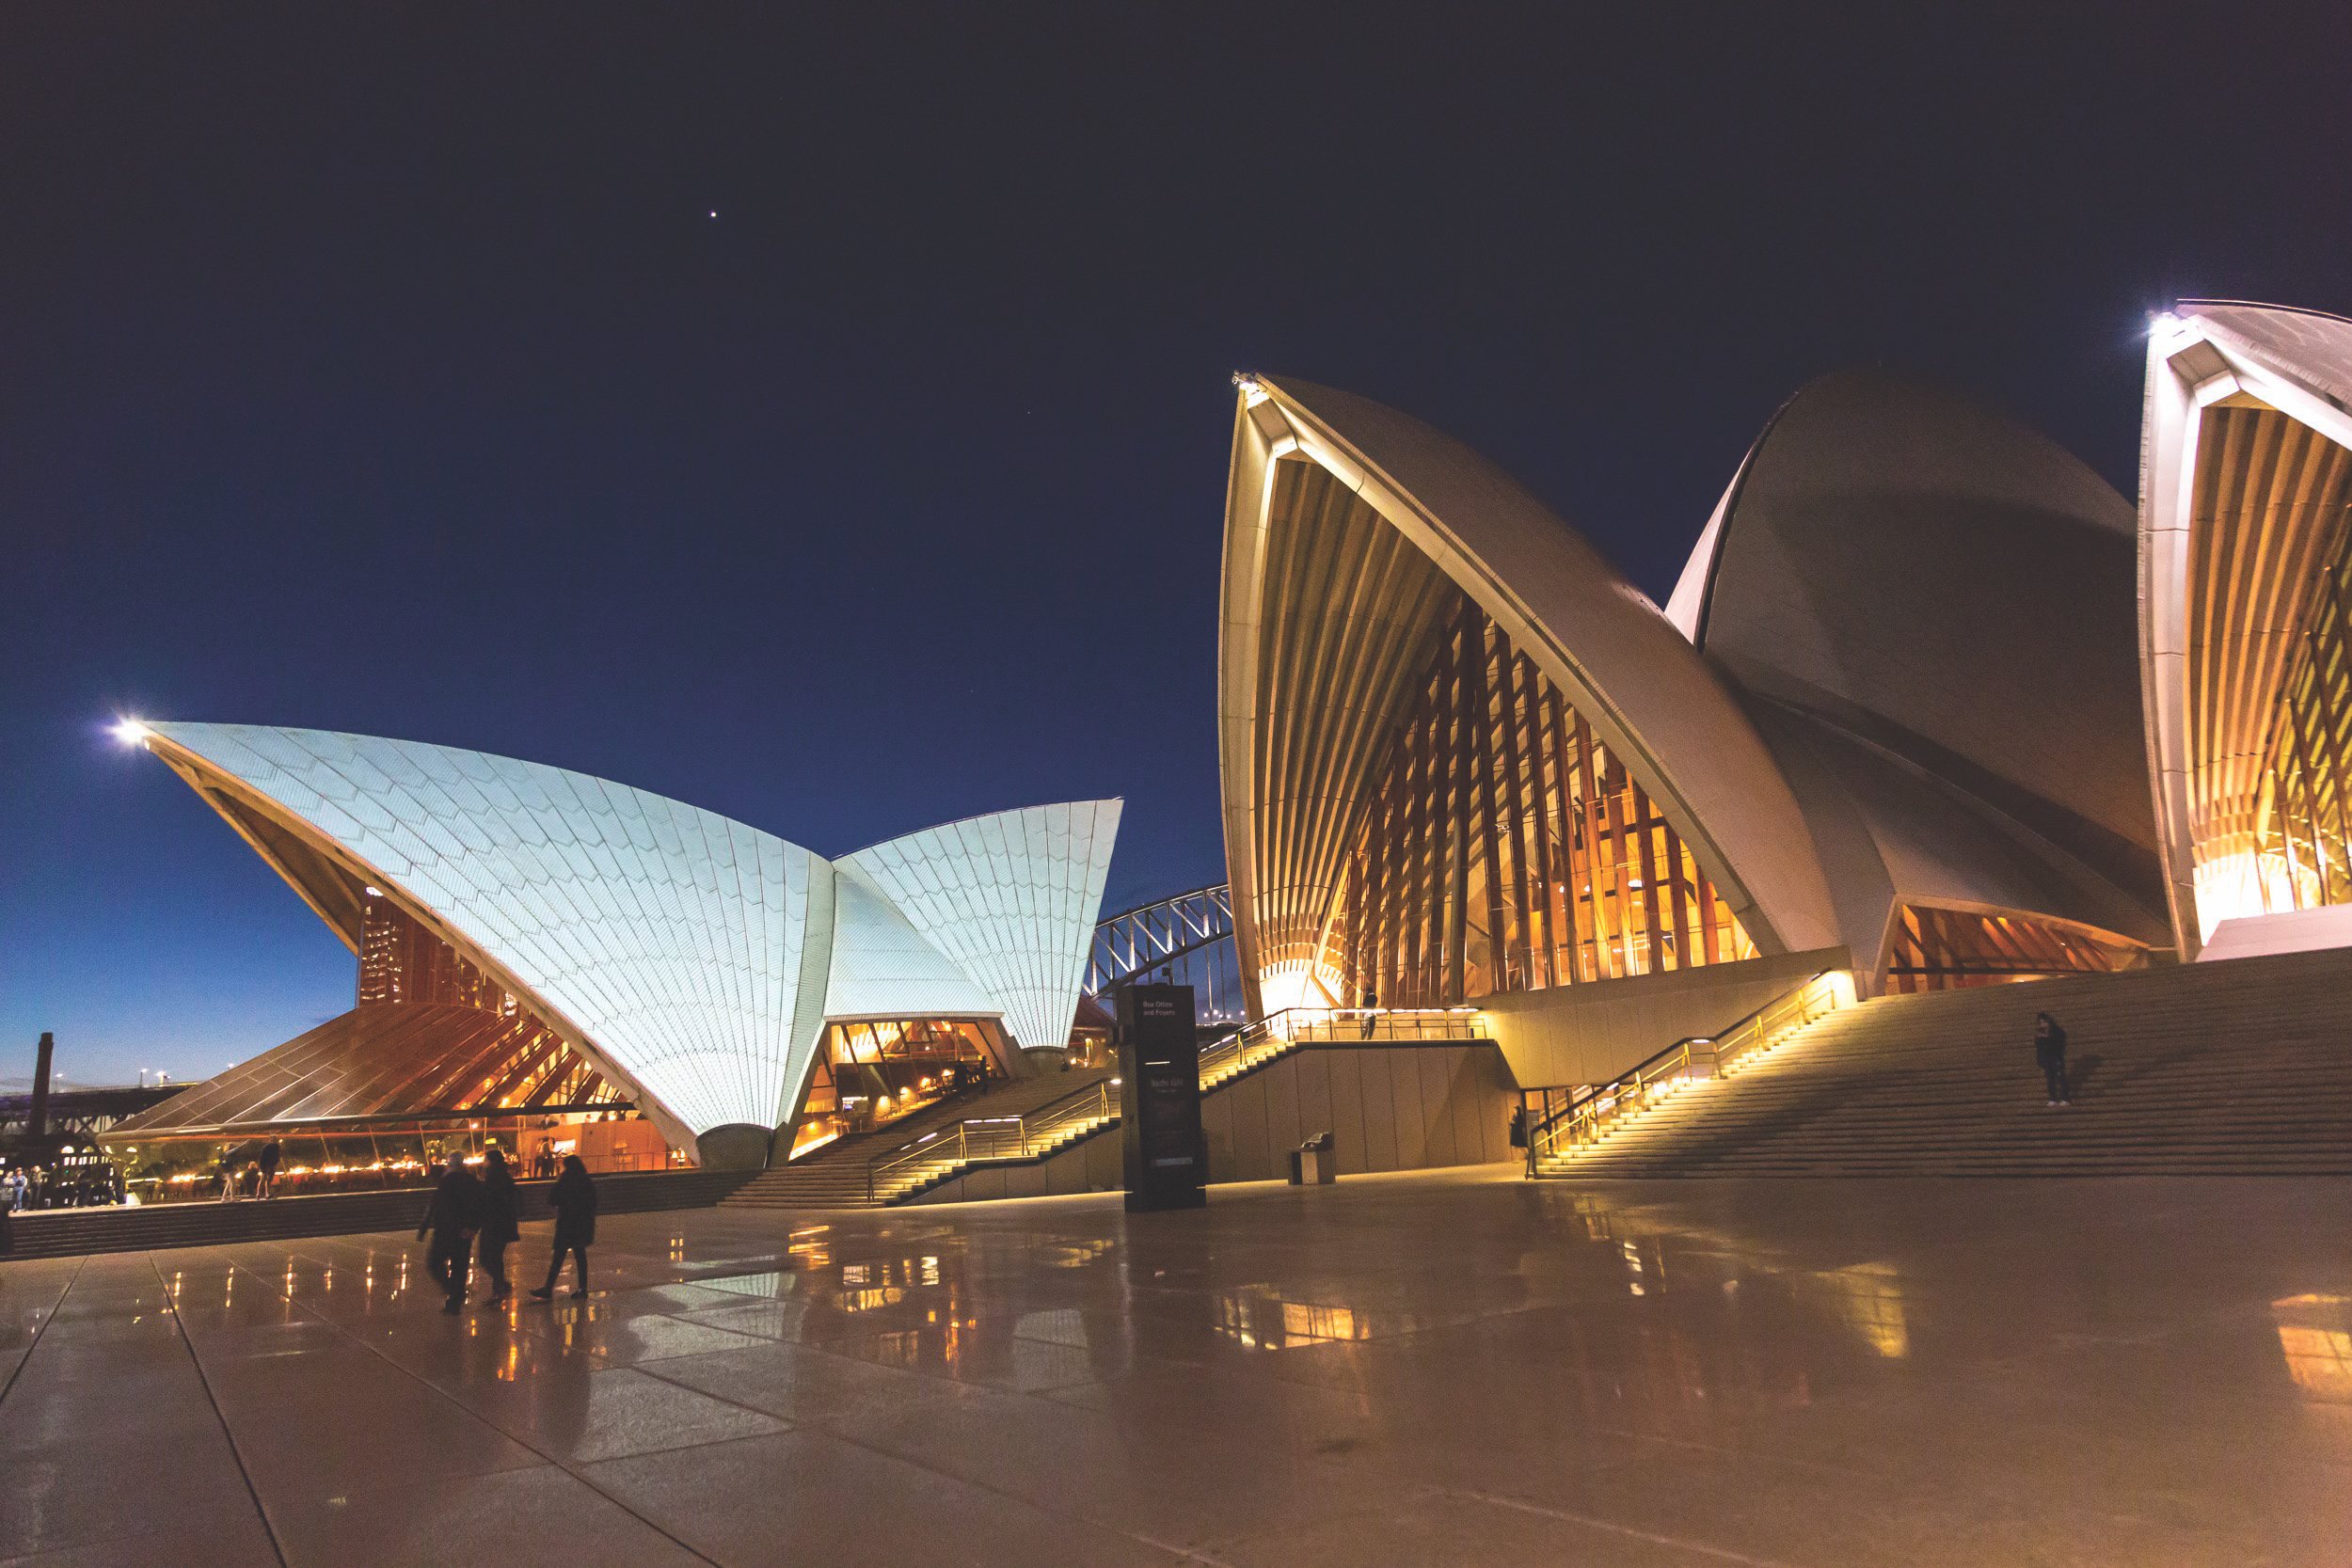  Sydney’s iconic Opera House is often illuminated for festive occasions; whether day or night, the sailboat-esque architectural masterpiece is a striking sight from various viewpoints around Sydney Harbor. 